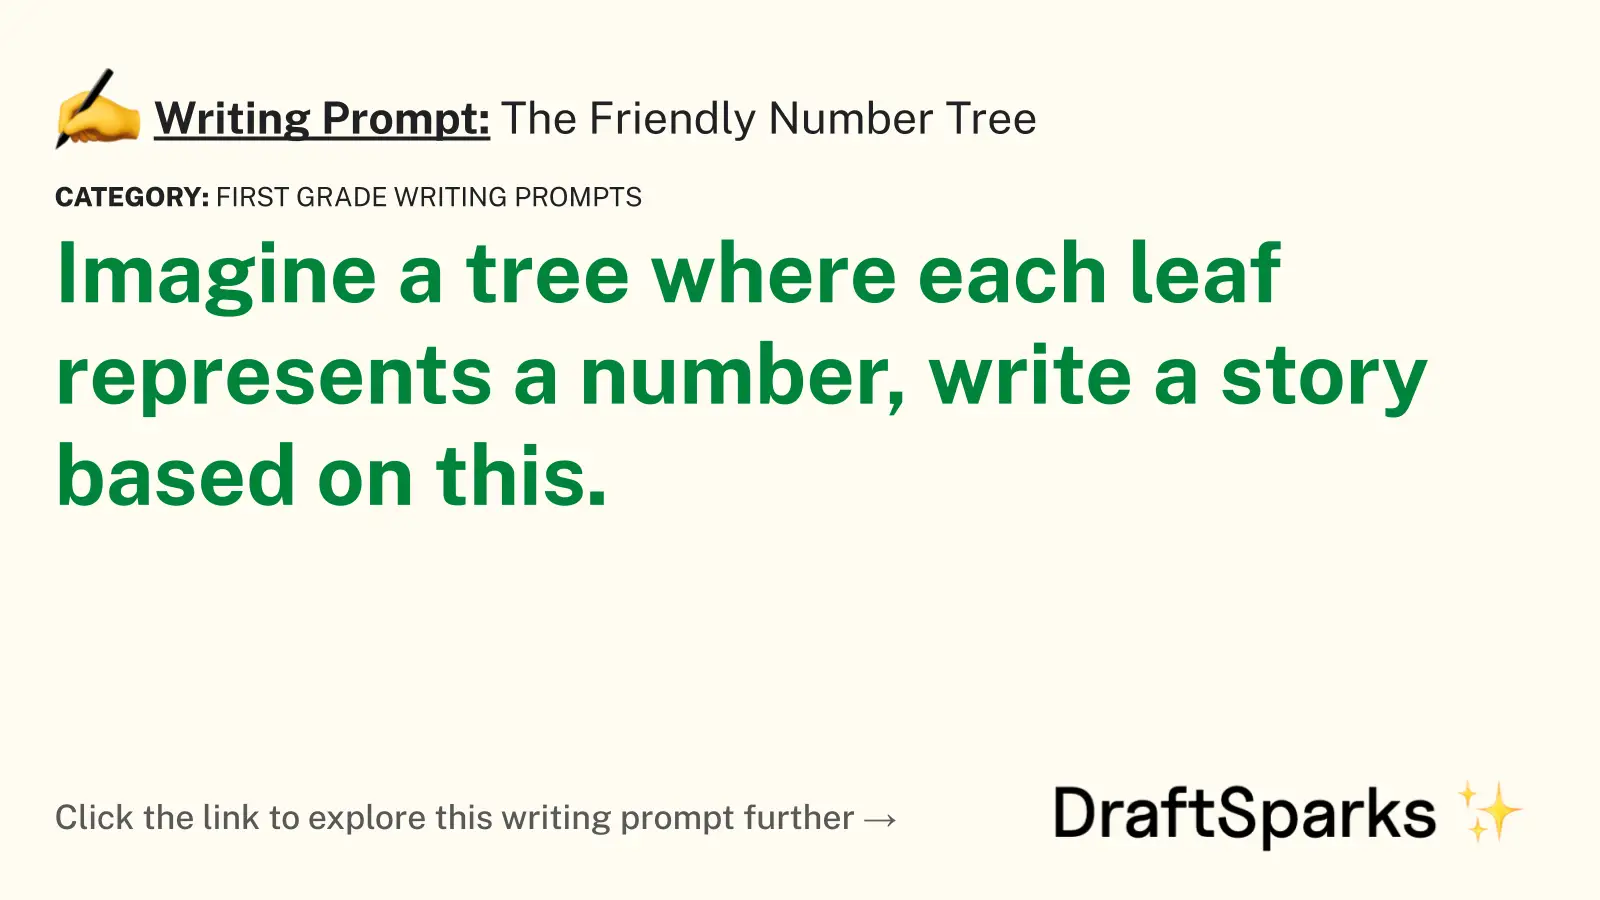 The Friendly Number Tree